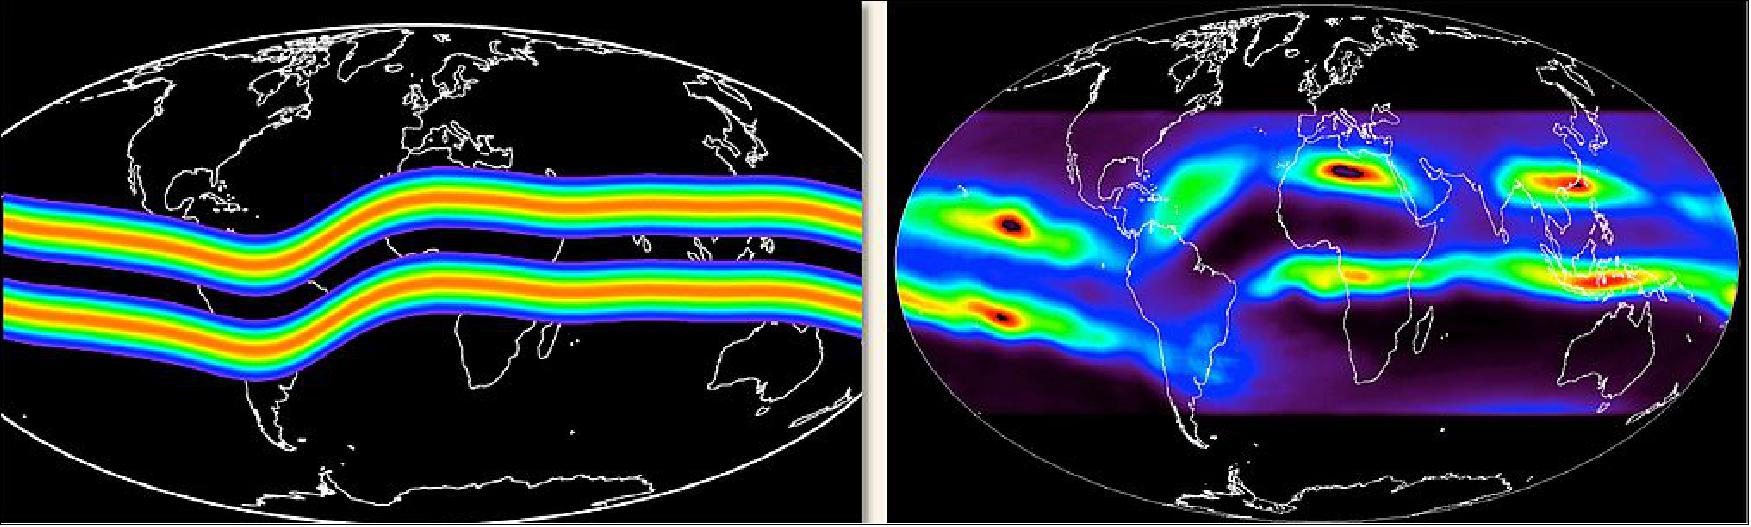 Figure 1: Left: The predicted distribution of plasma around the magnetic equator after sunset. Right: The observed distribution of plasma around the magnetic equator, made by NASA's TIMED spacecraft. Notice the large, unexplained enhancements over the continents (image credit: UCB/SSL)